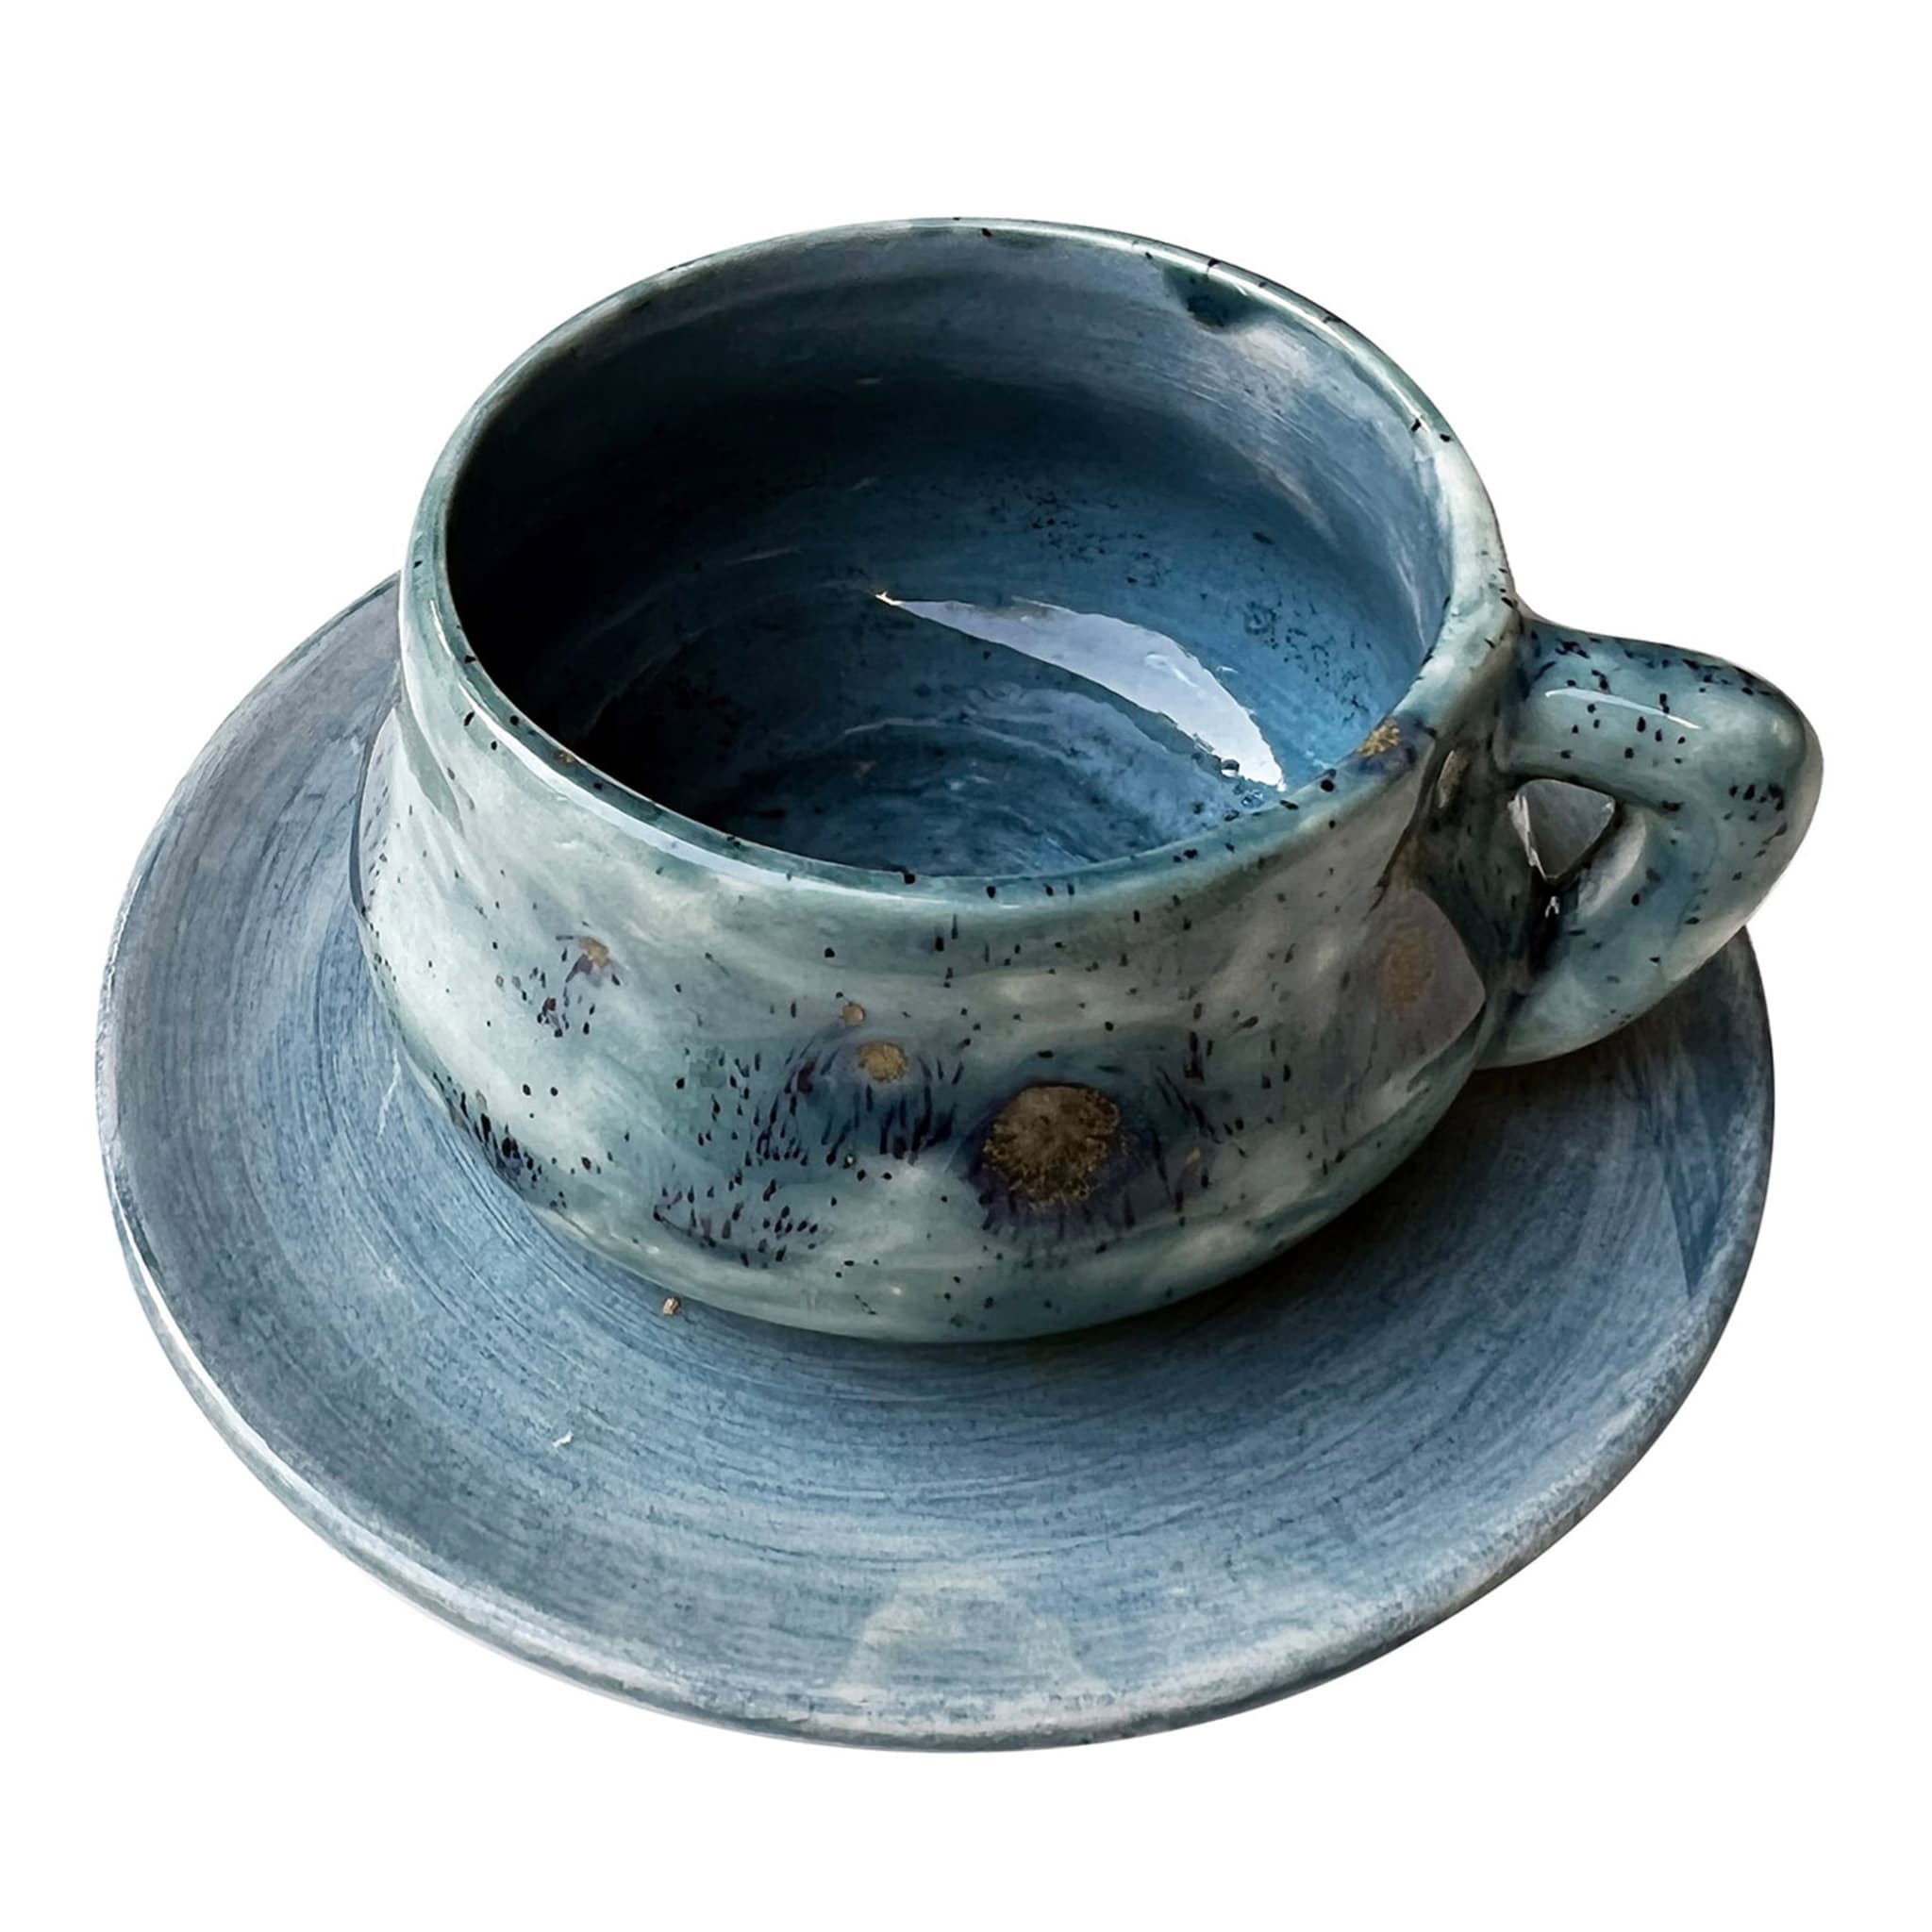 Handmade Pottery Blue Cappuccino Cup & Saucer